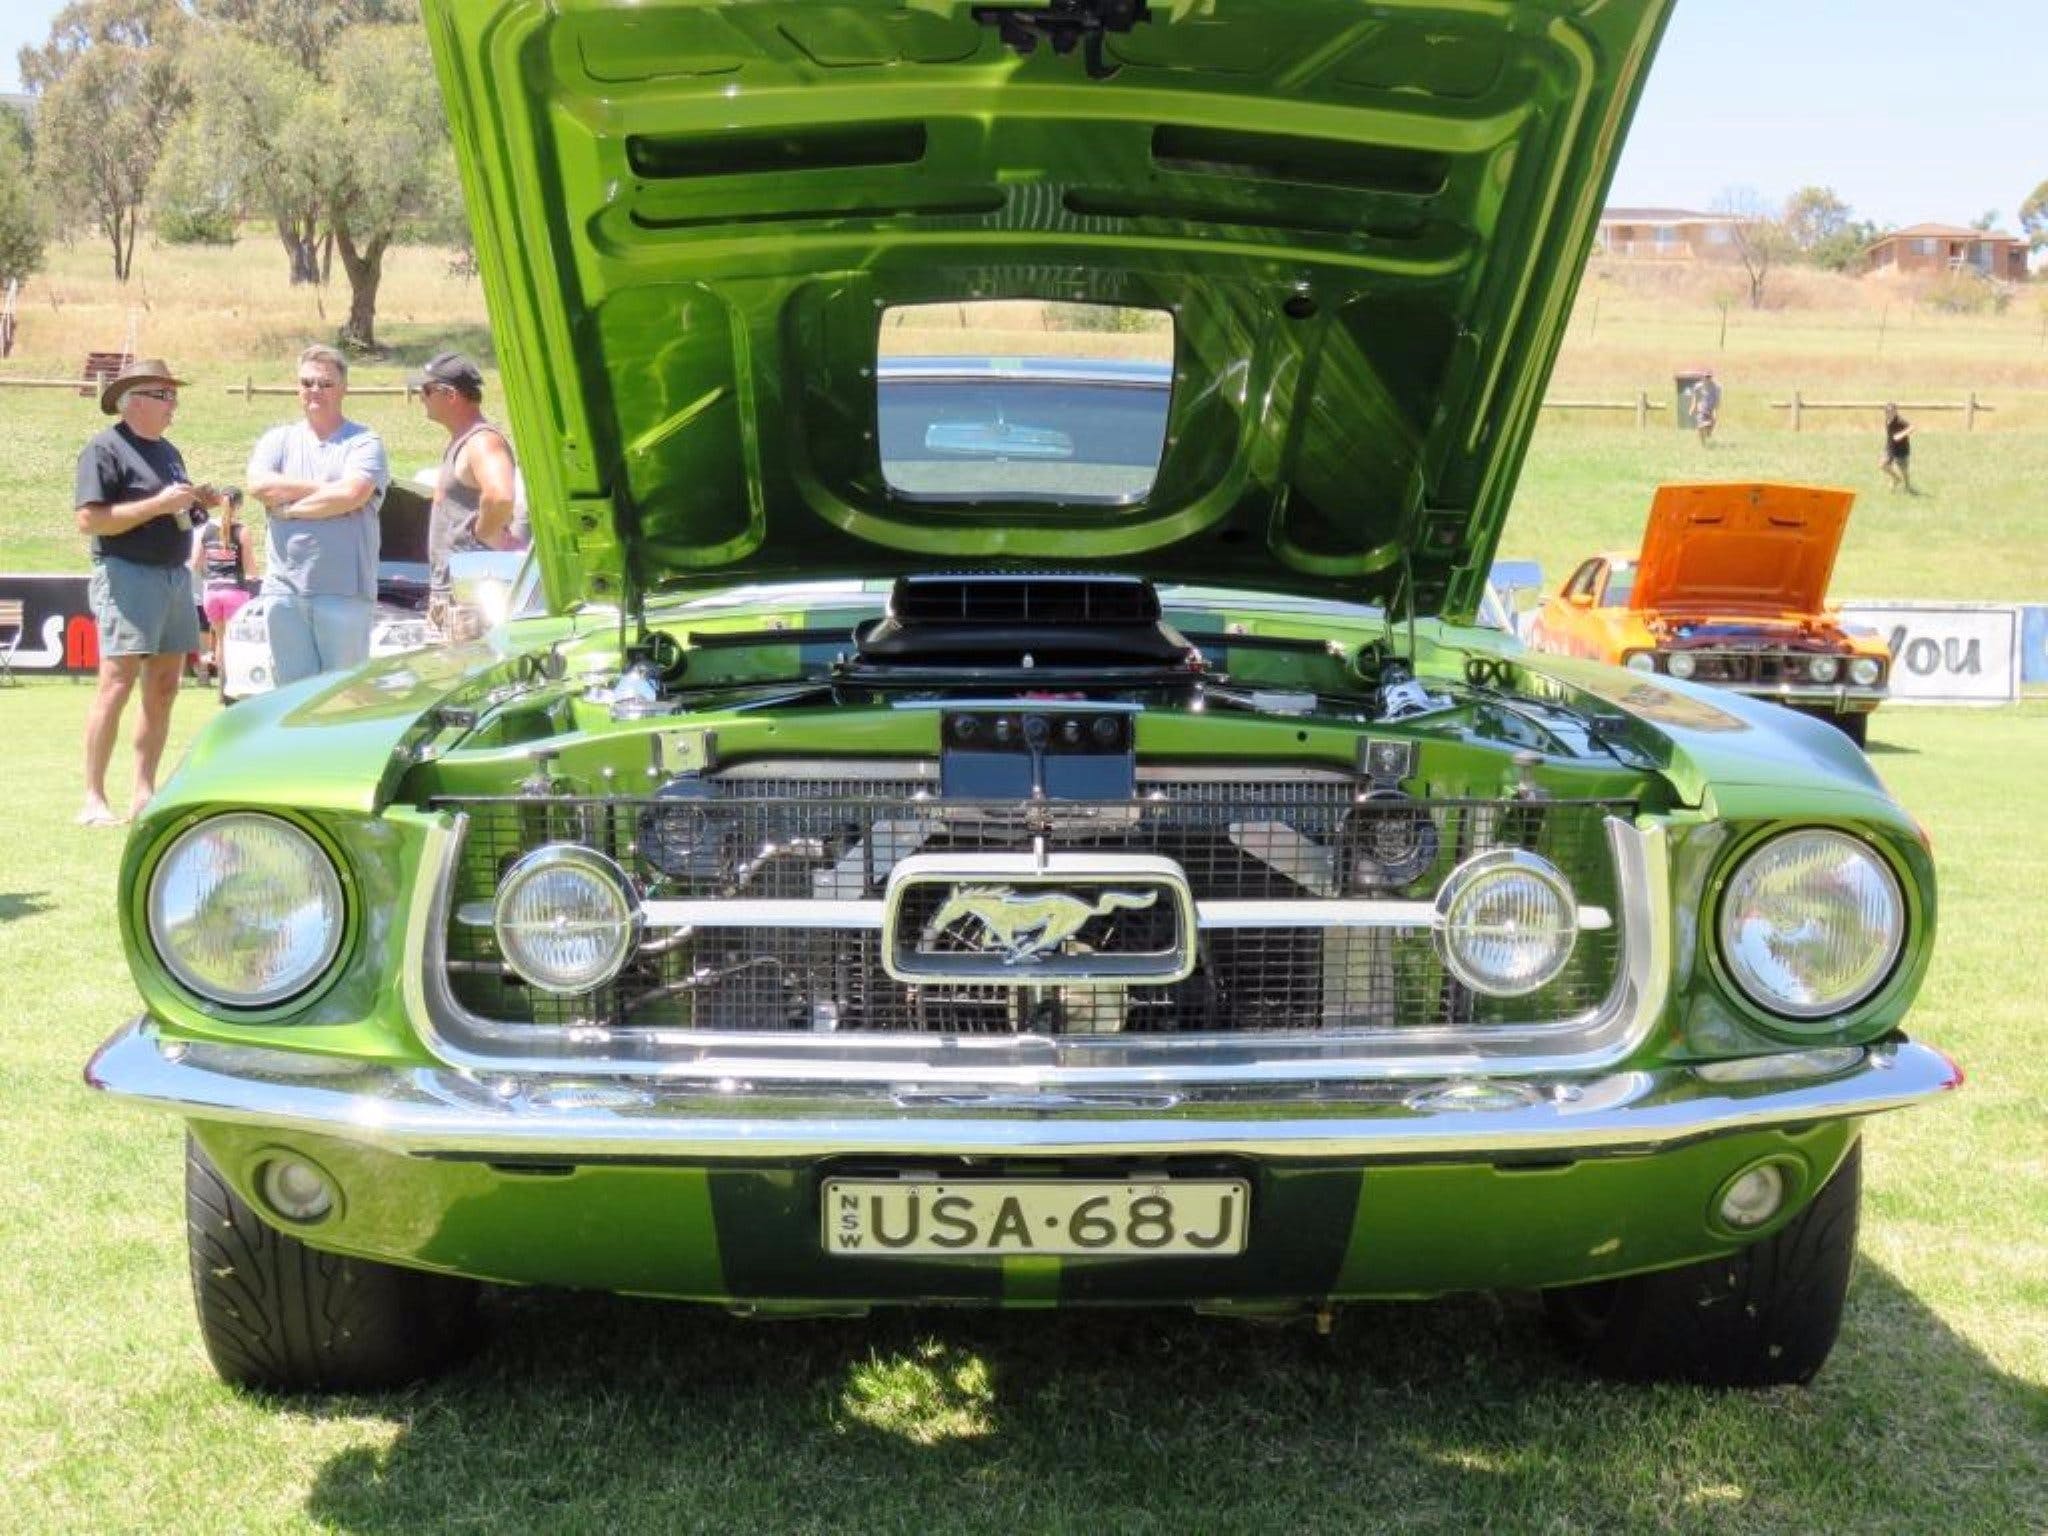 Central West Car Club Charity Show and Shine - Townsville Tourism